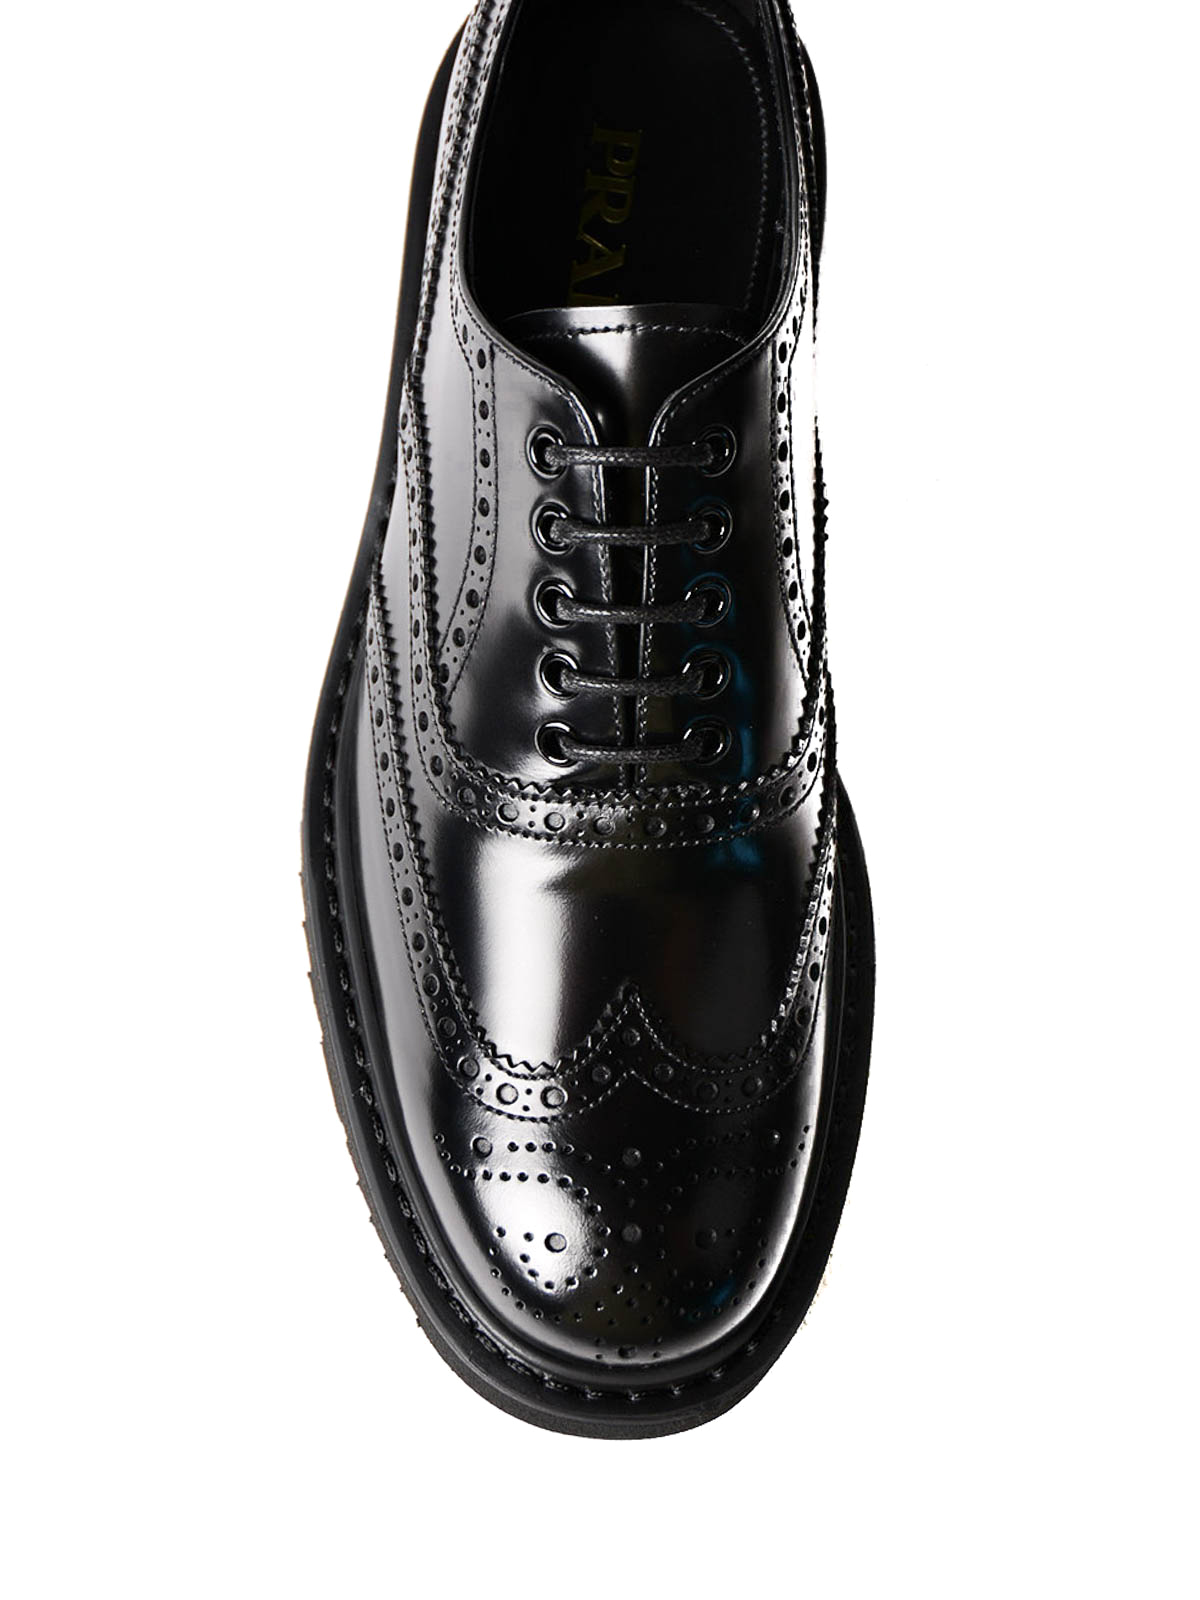 Lace-ups shoes Prada - Brushed leather Oxford brogues - 2EG224P39002